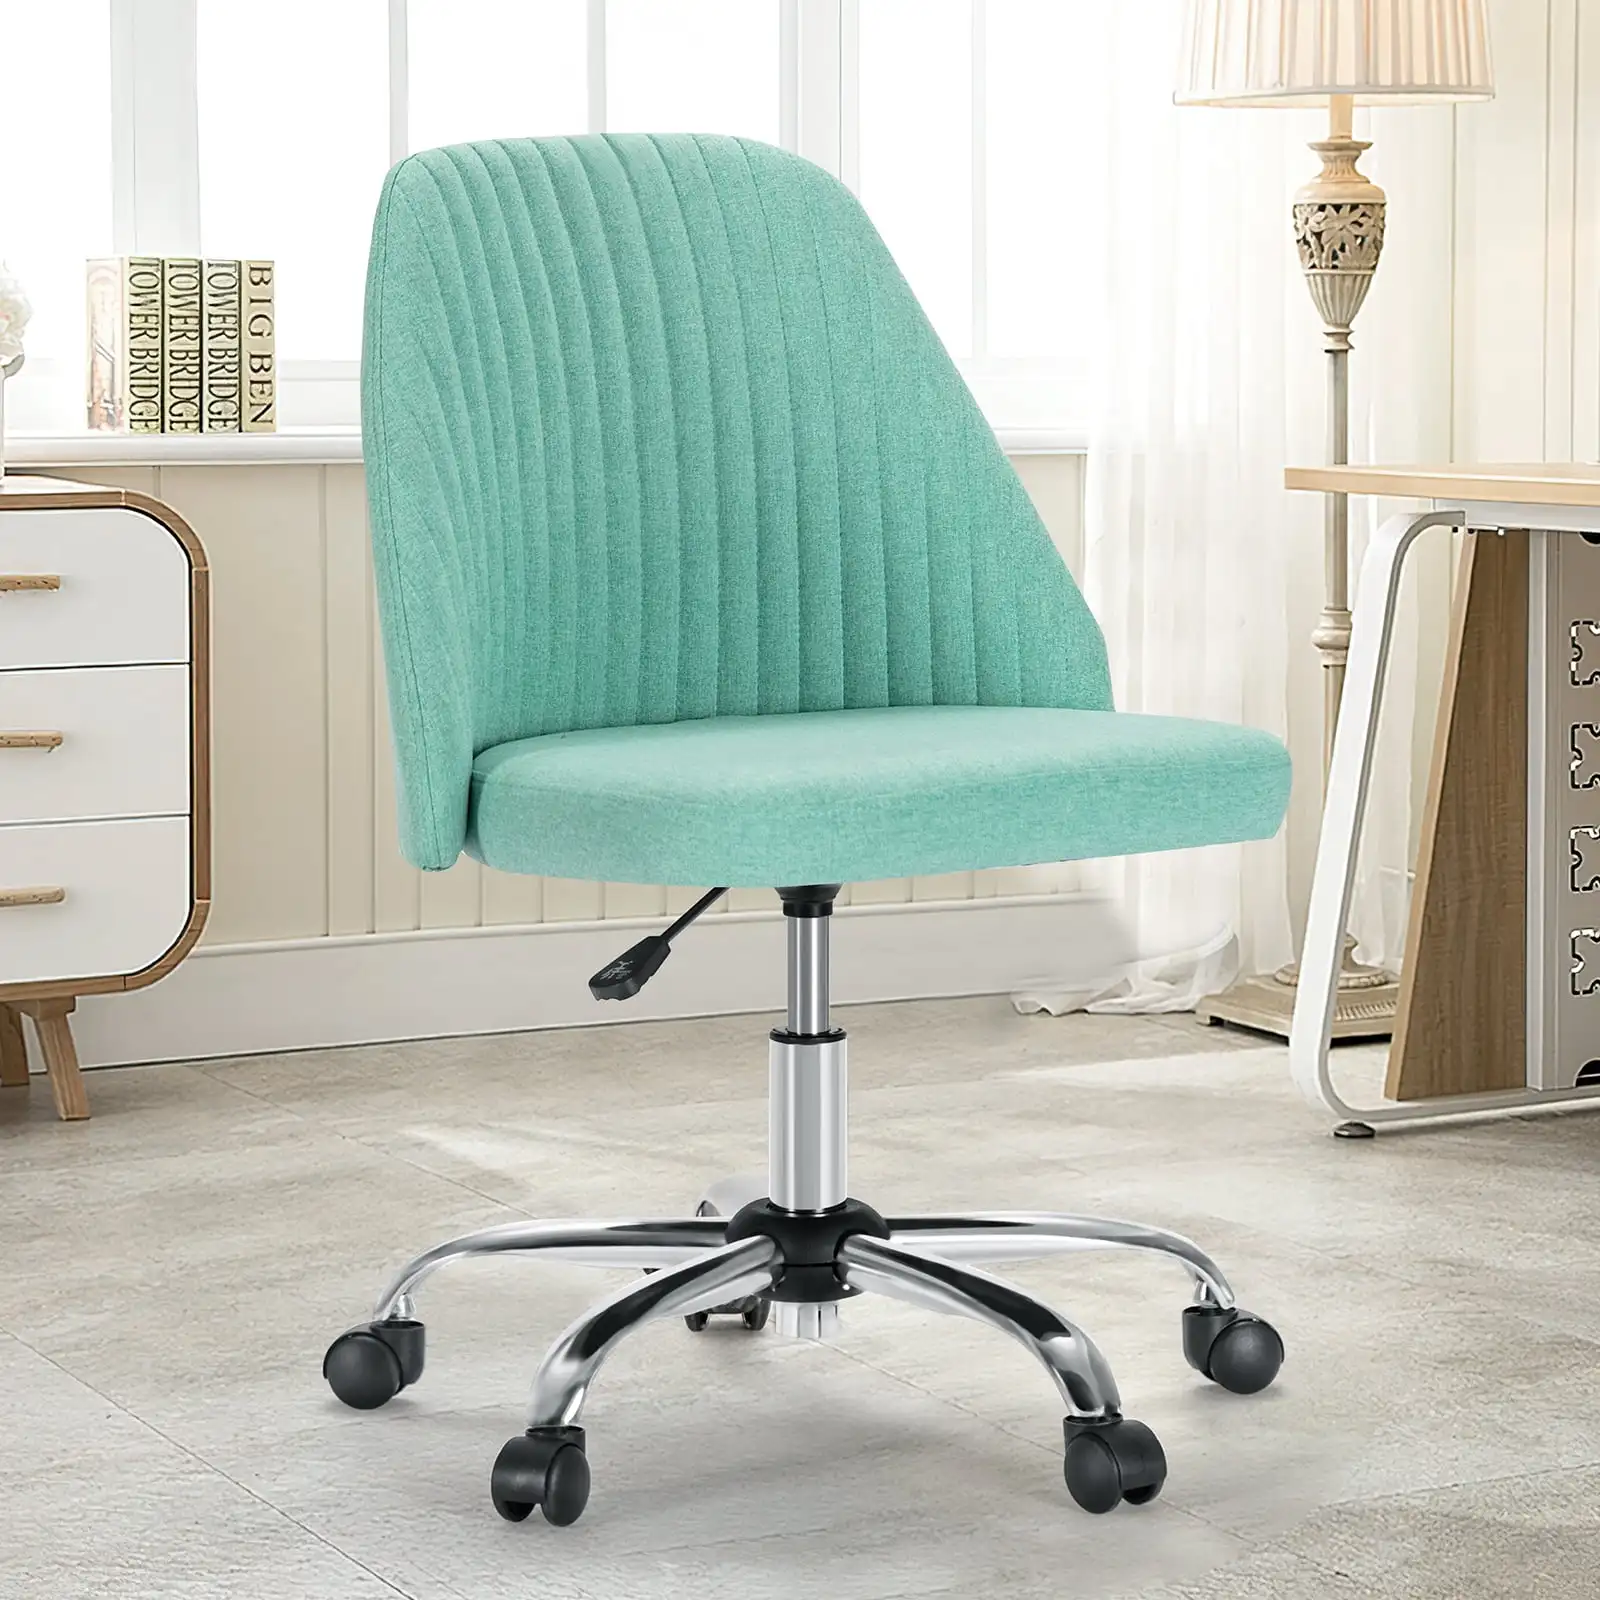 

Adjustable Rolling Home Office Chair Armless Task Chair Mid-Back Make Up Vanity Chair, Green